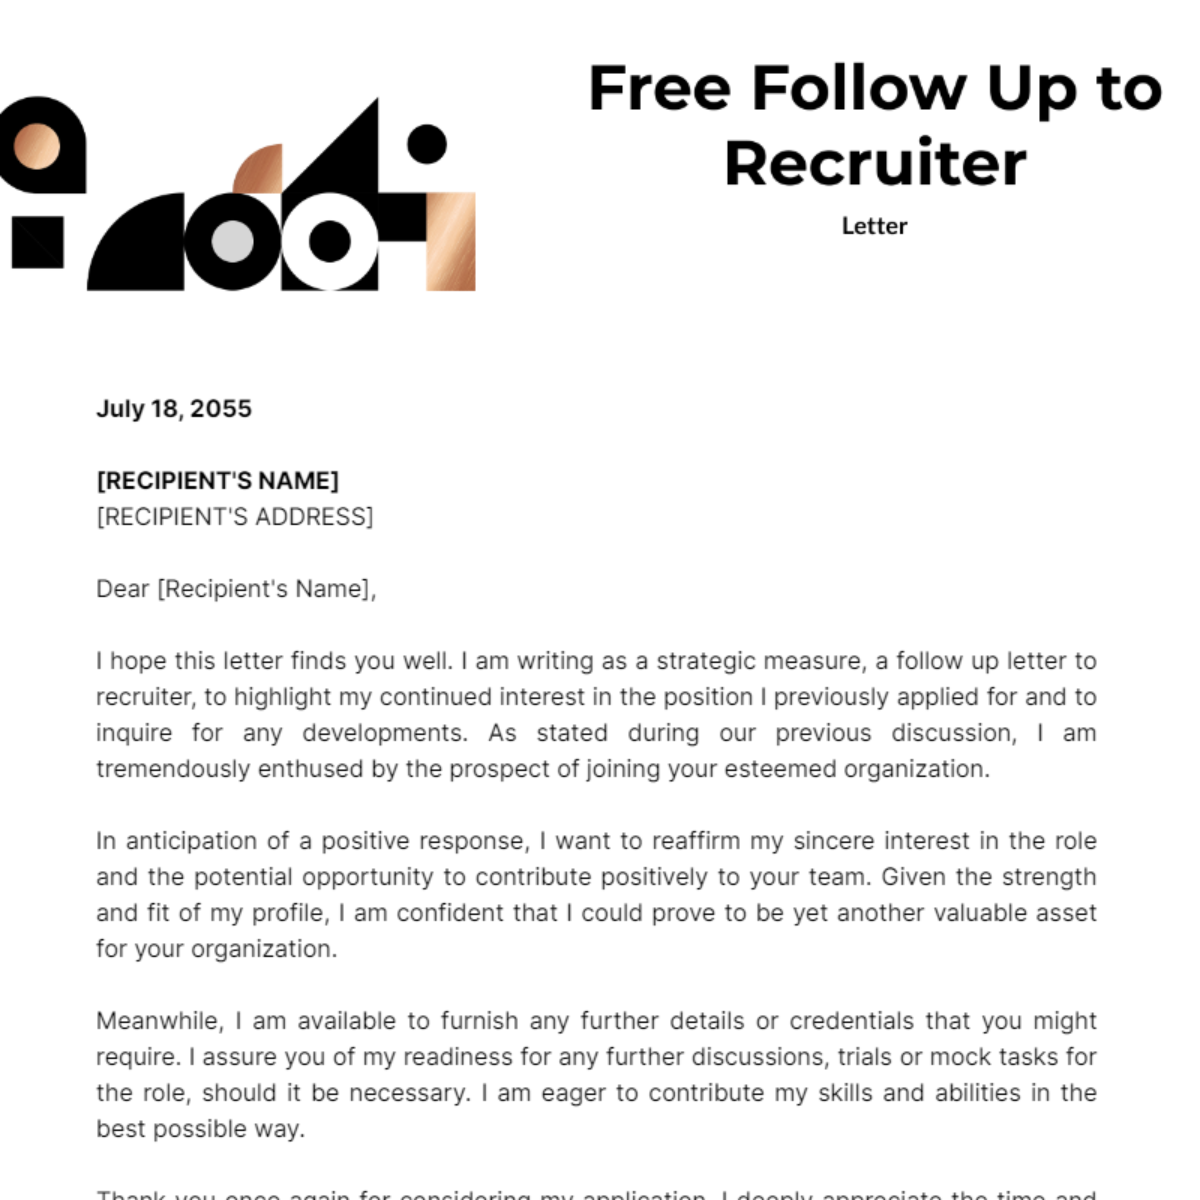 Follow Up Letter to Recruiter Template